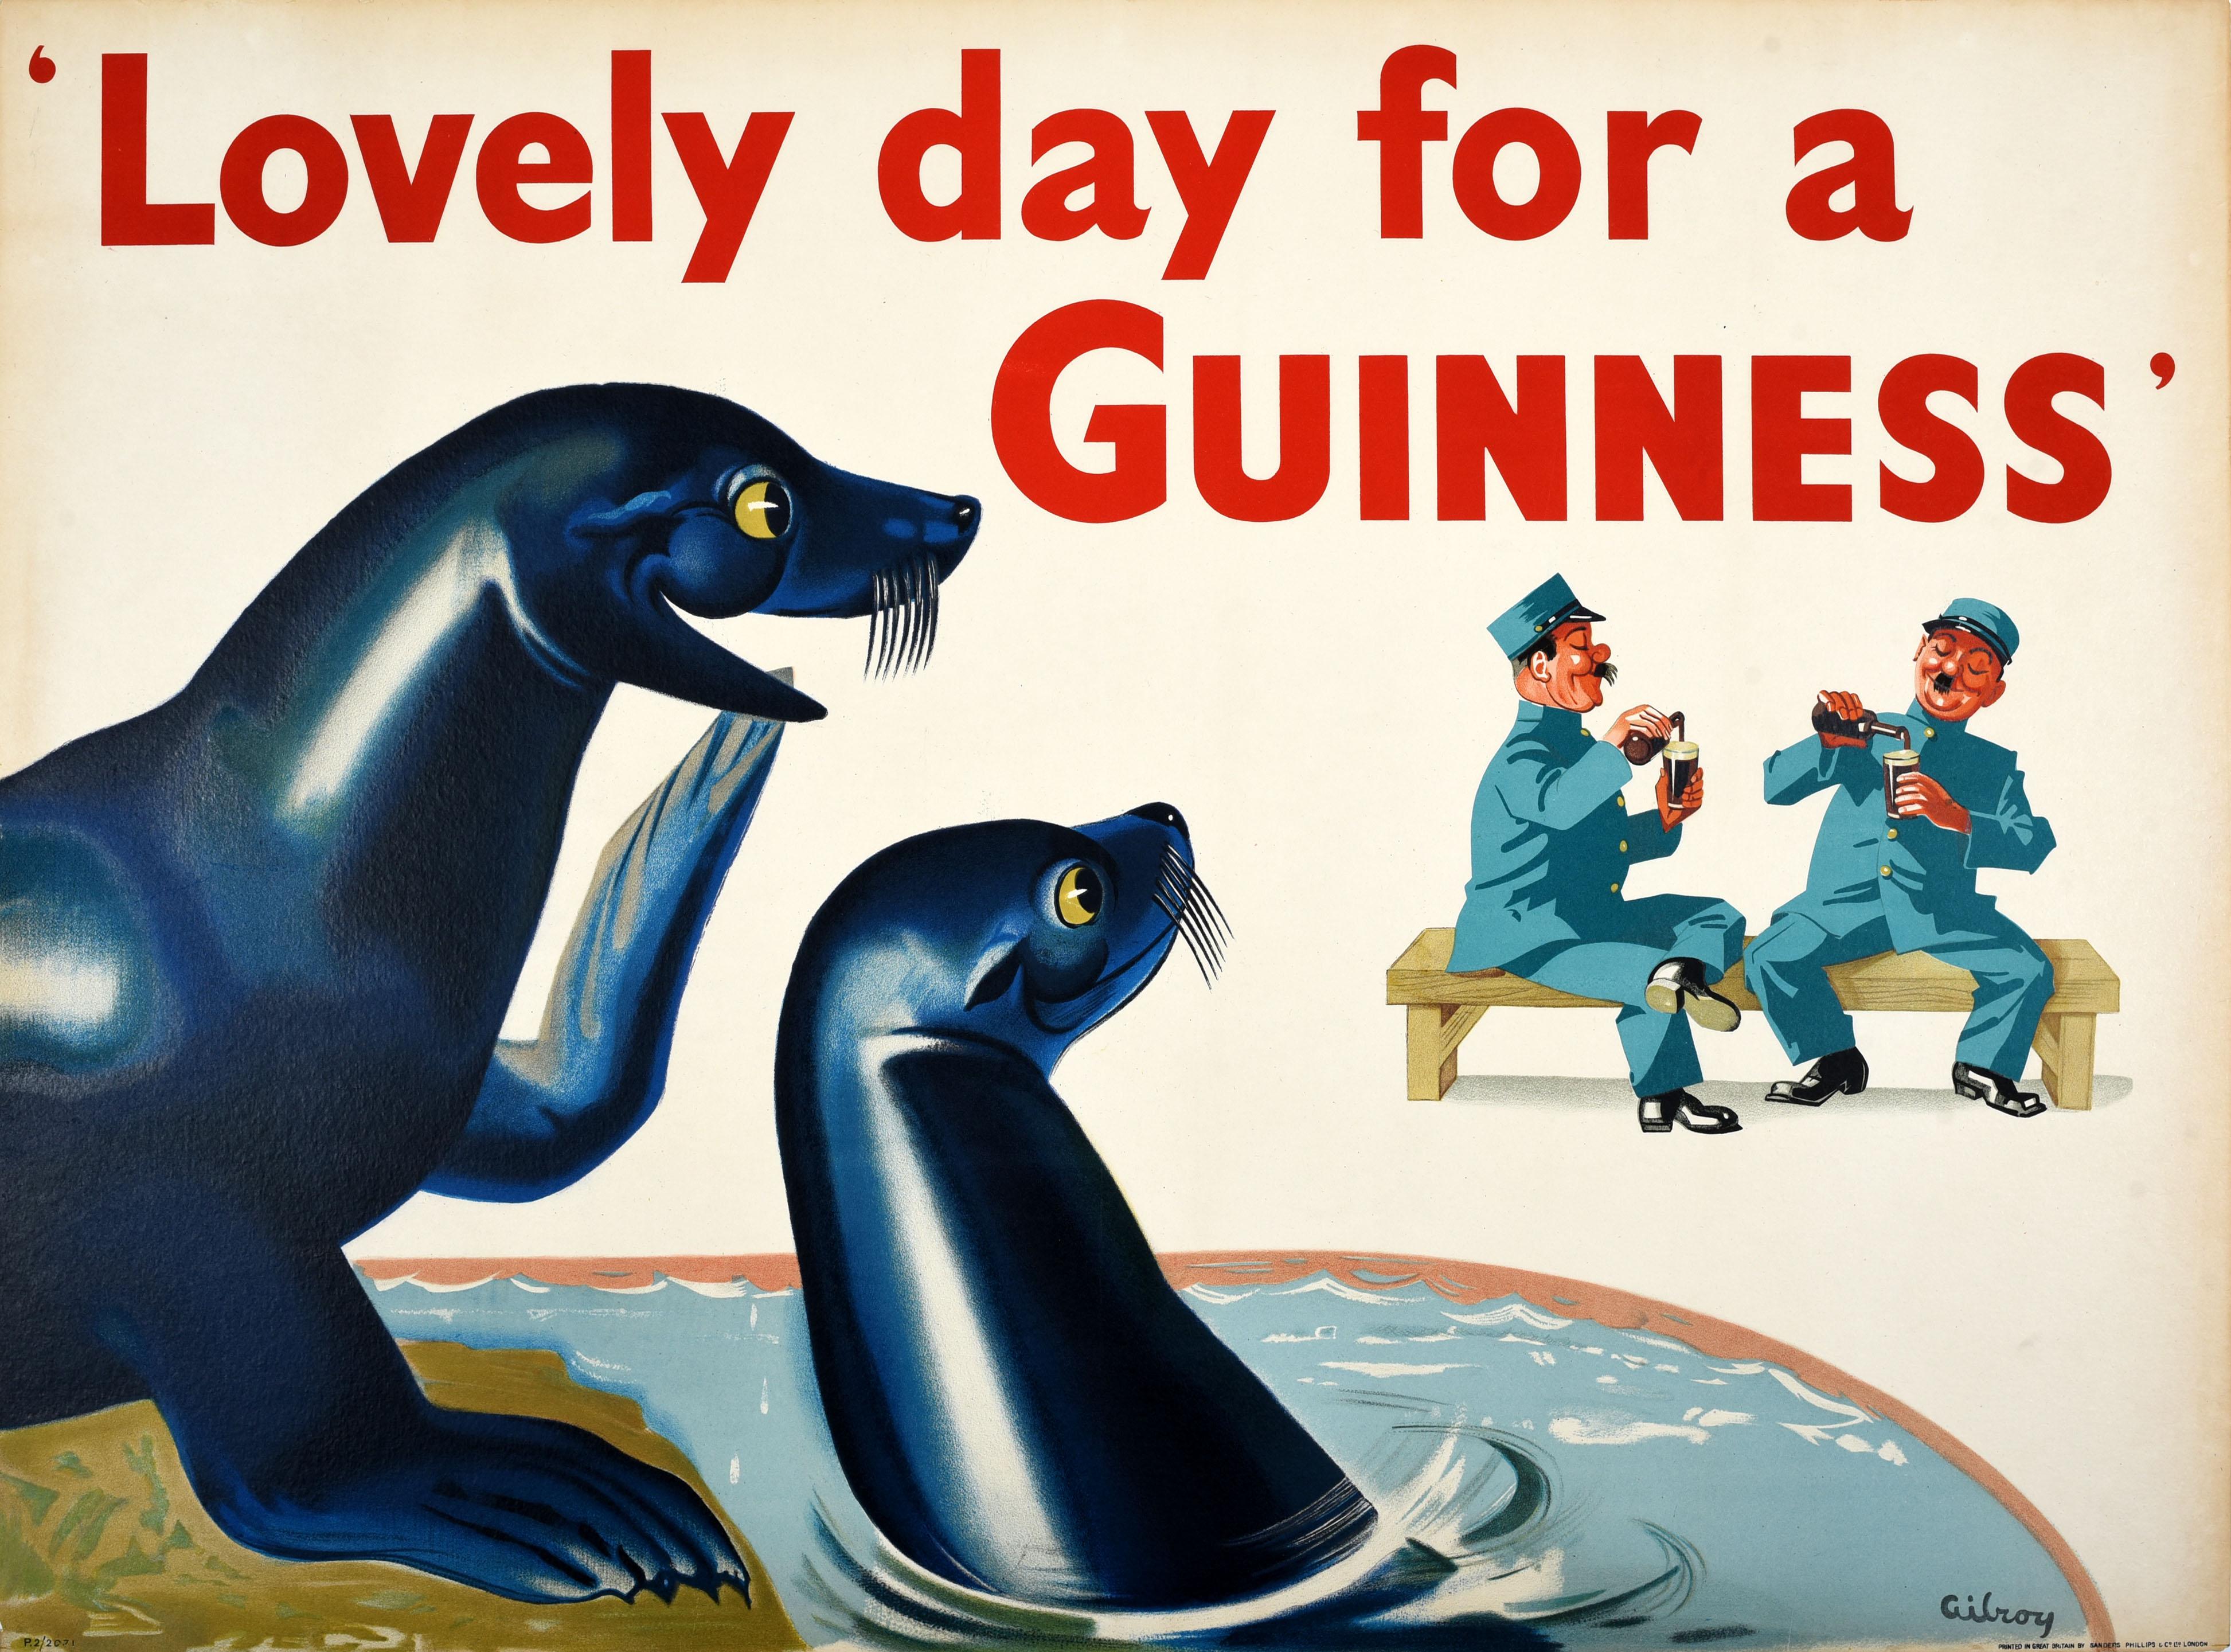 John Gilroy Print - Original Vintage Advertising Poster Lovely Day For A Guinness Irish Stout Gilroy